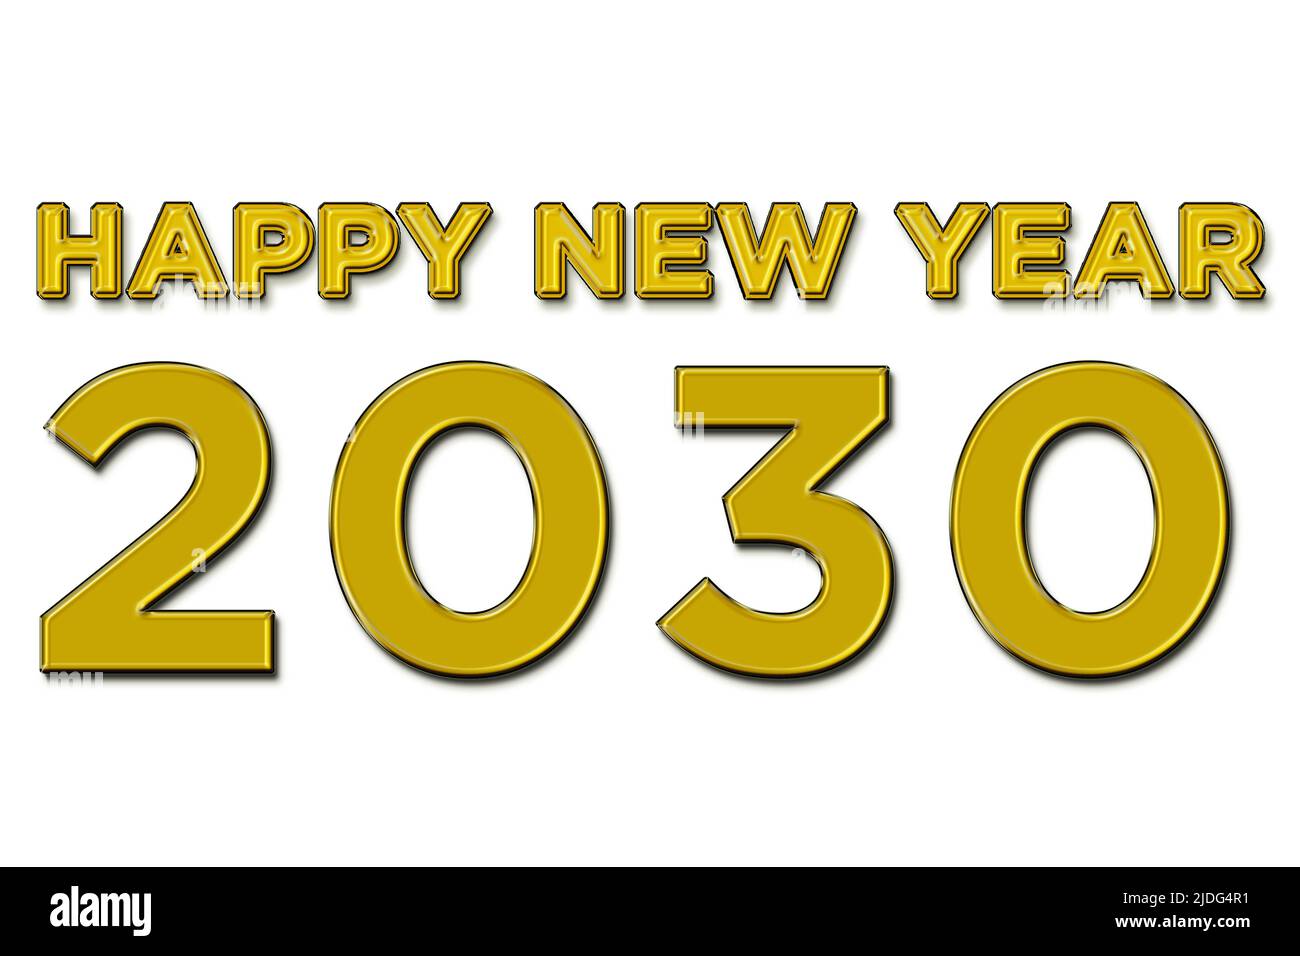 Happy new year 2030 illustration in yellow color text on white background Stock Photo